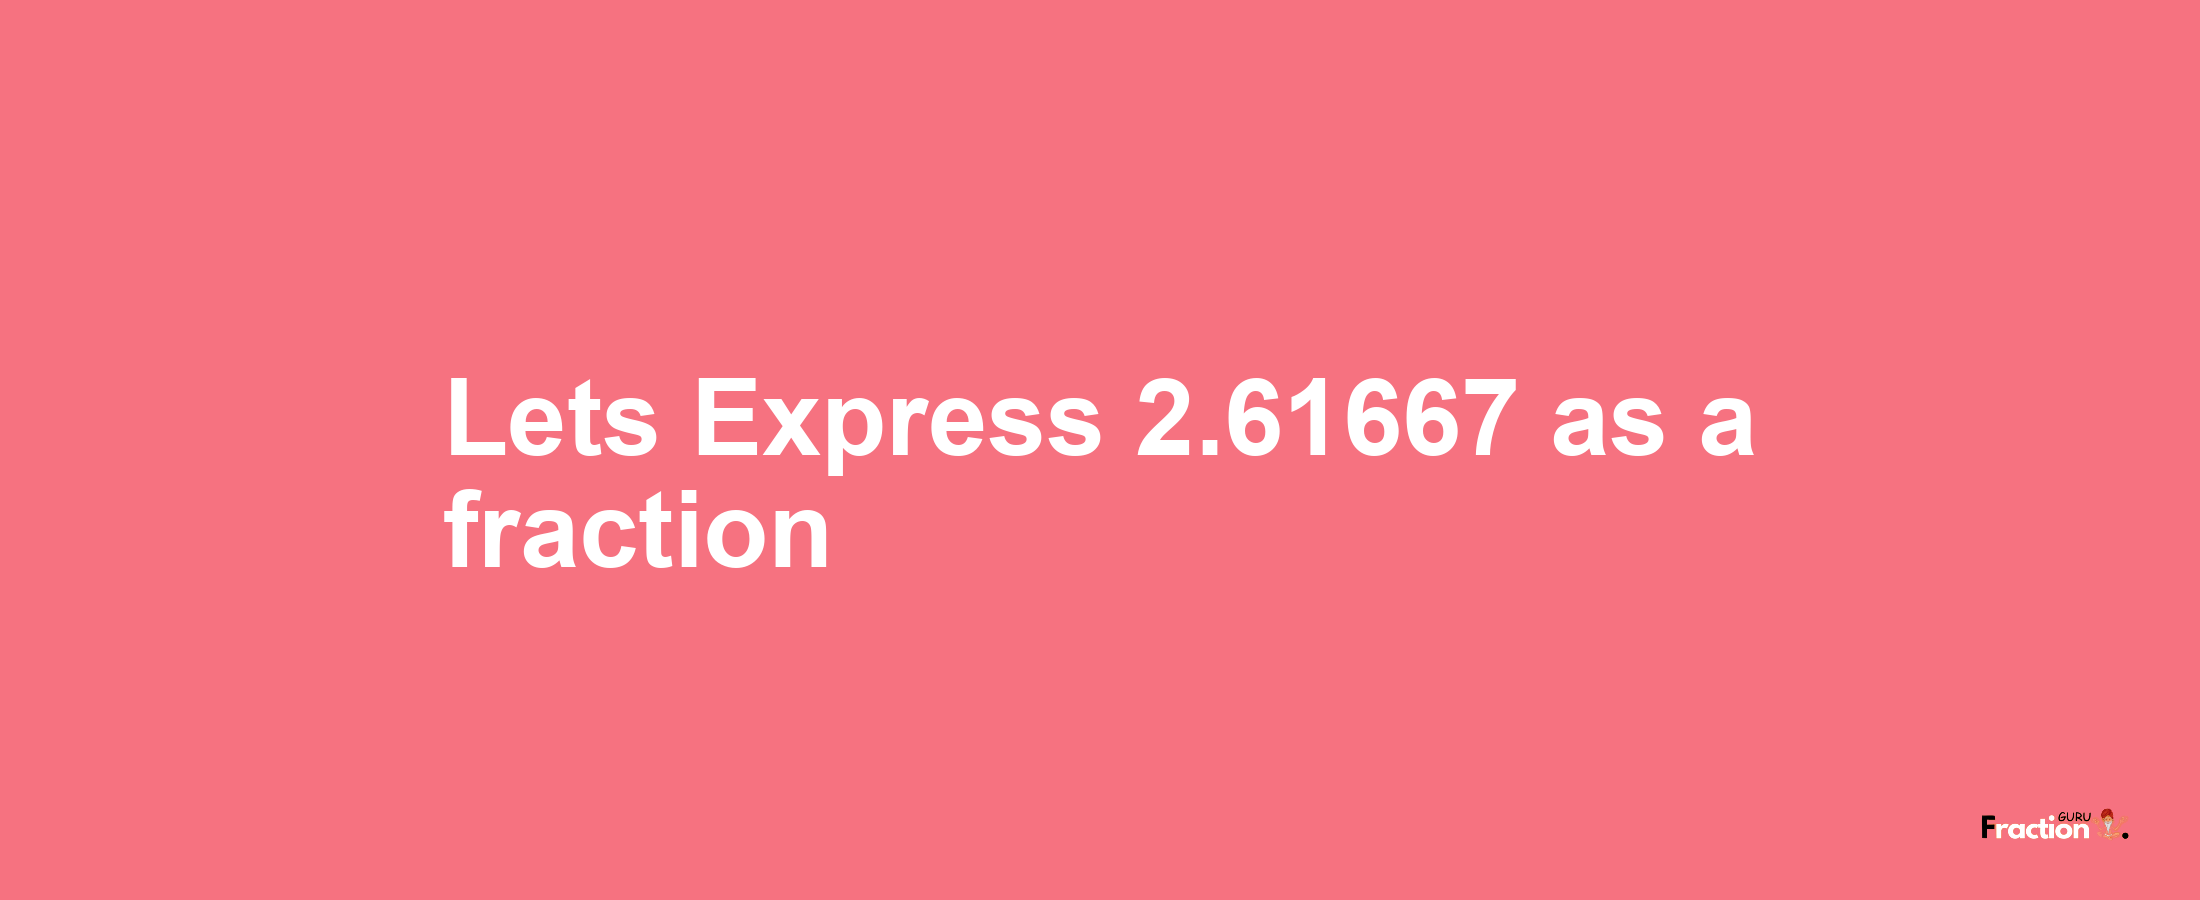 Lets Express 2.61667 as afraction